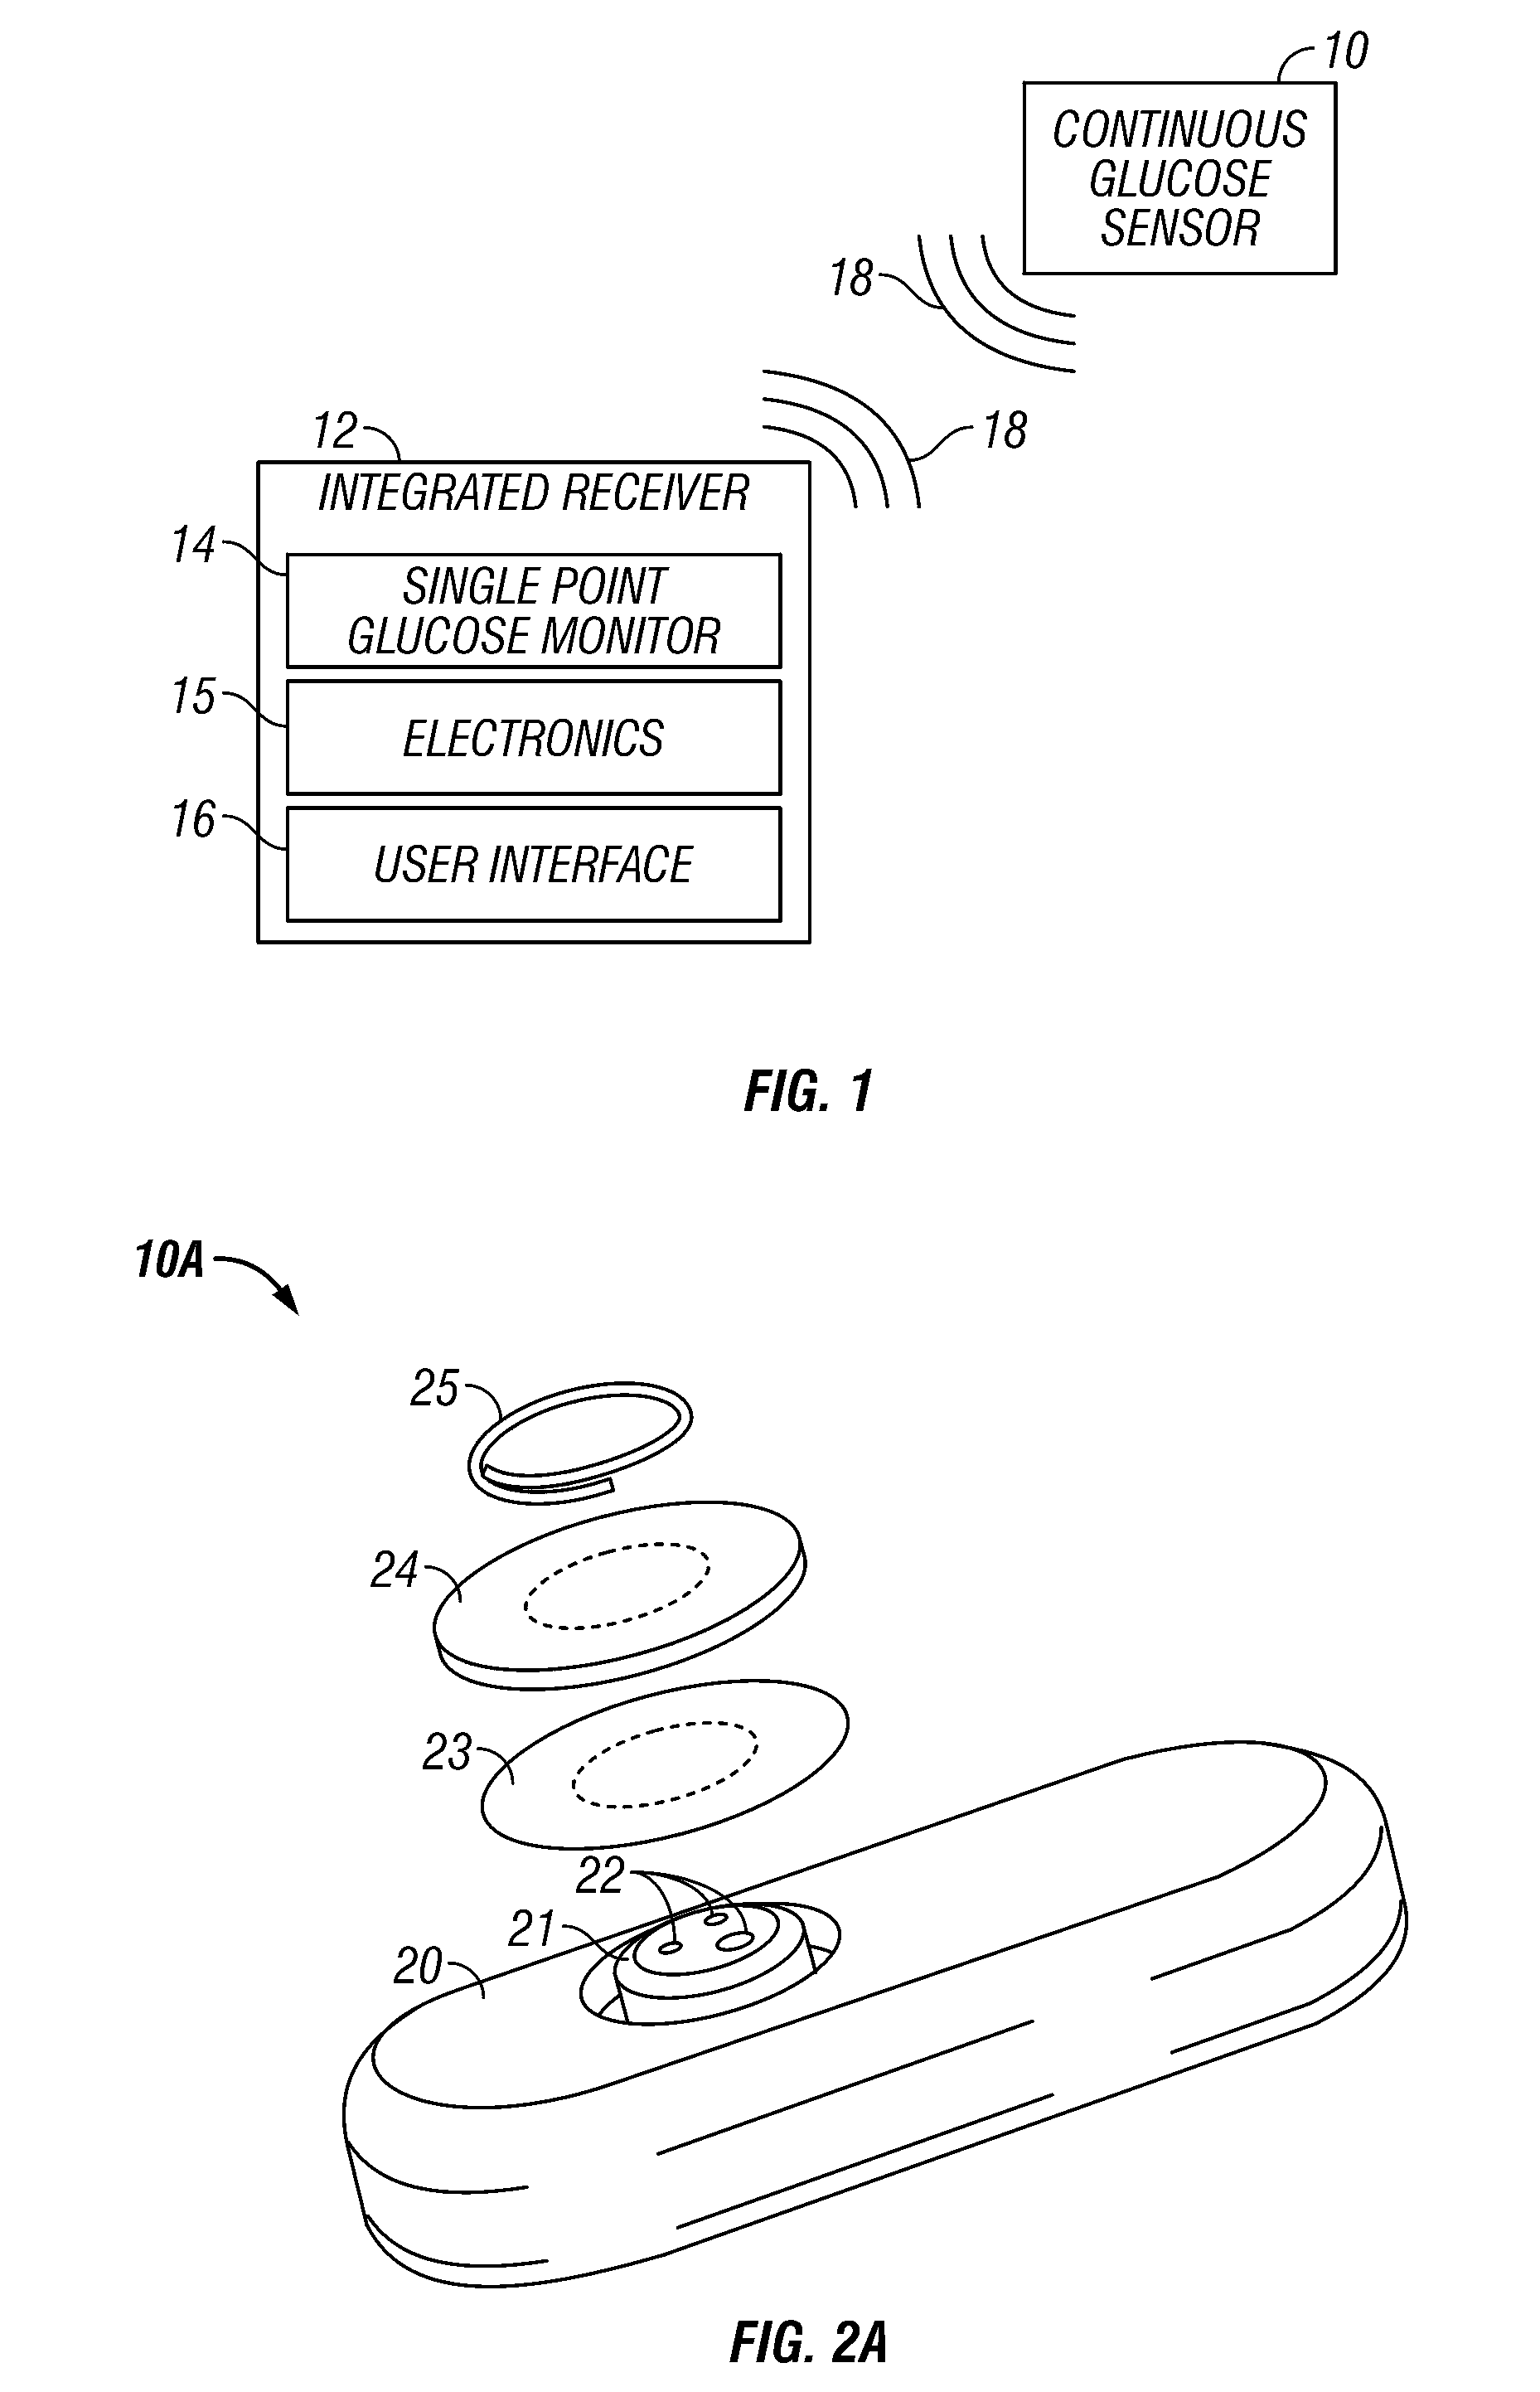 Integrated receiver for continuous analyte sensor